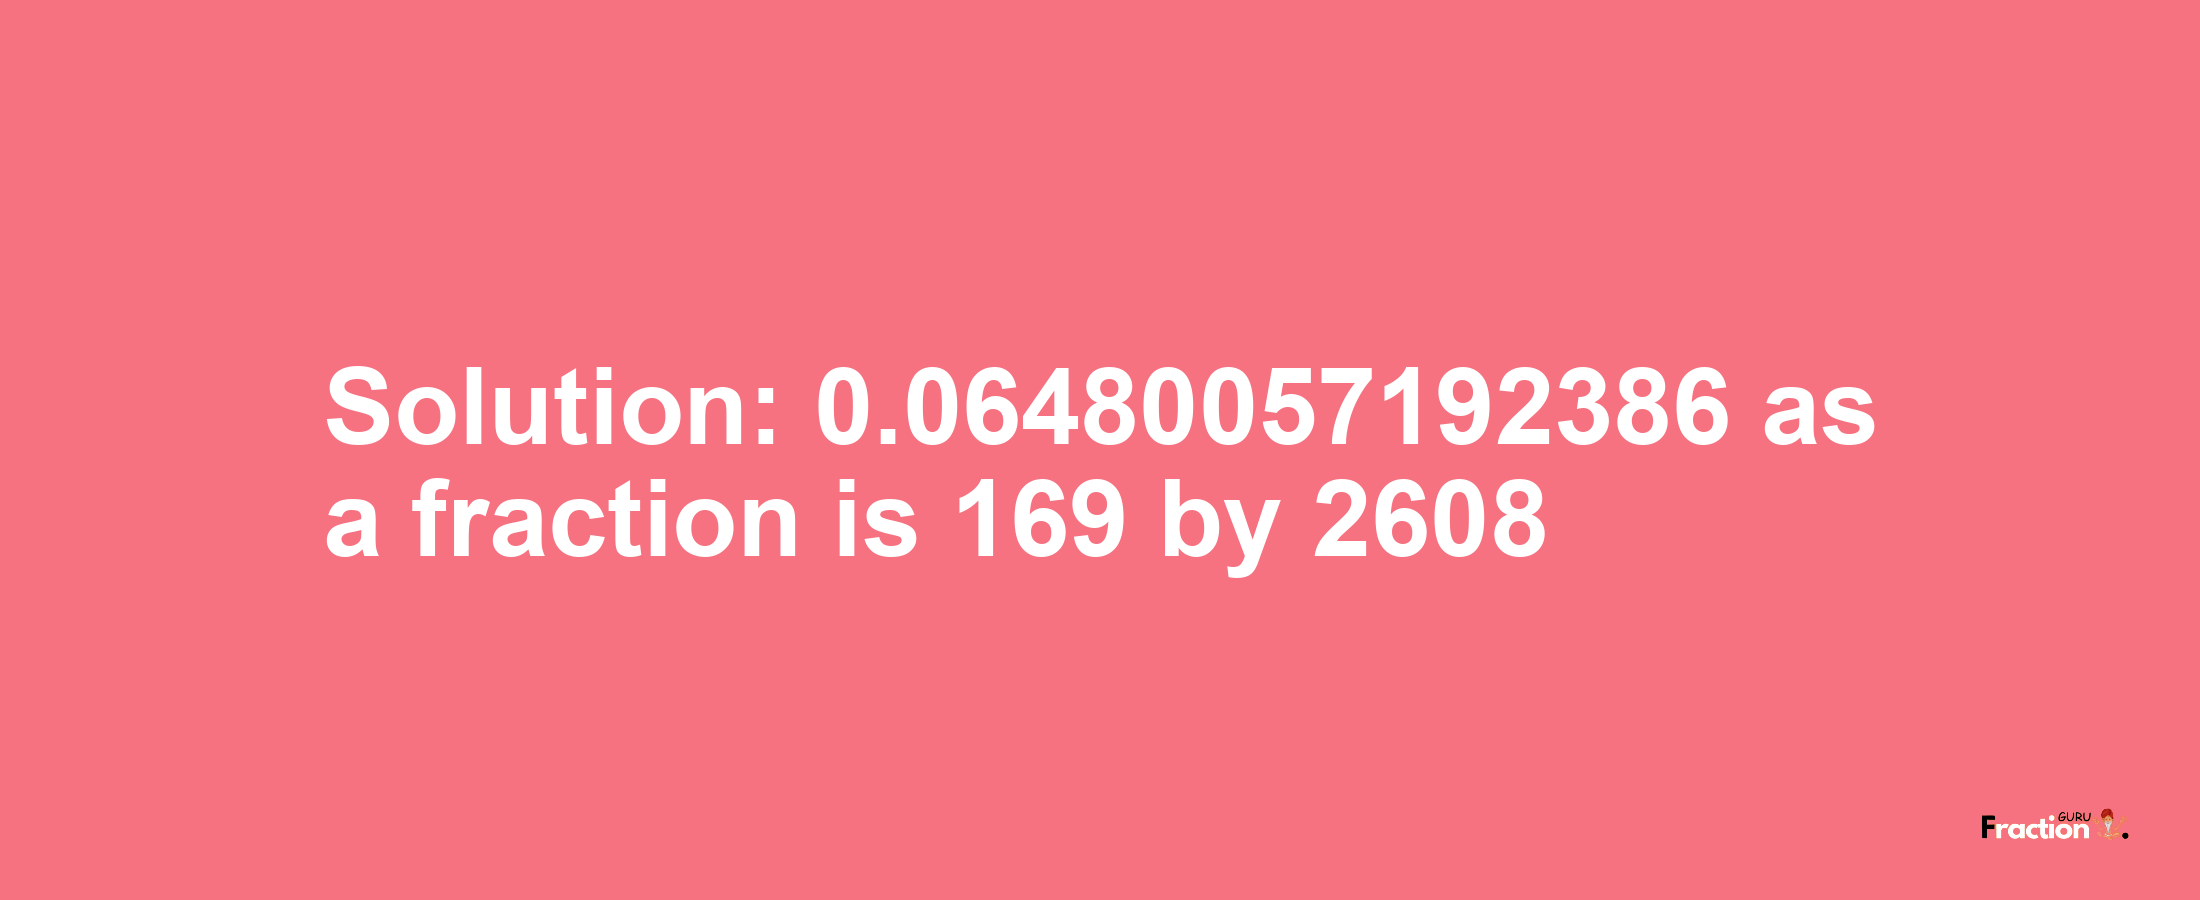 Solution:0.06480057192386 as a fraction is 169/2608